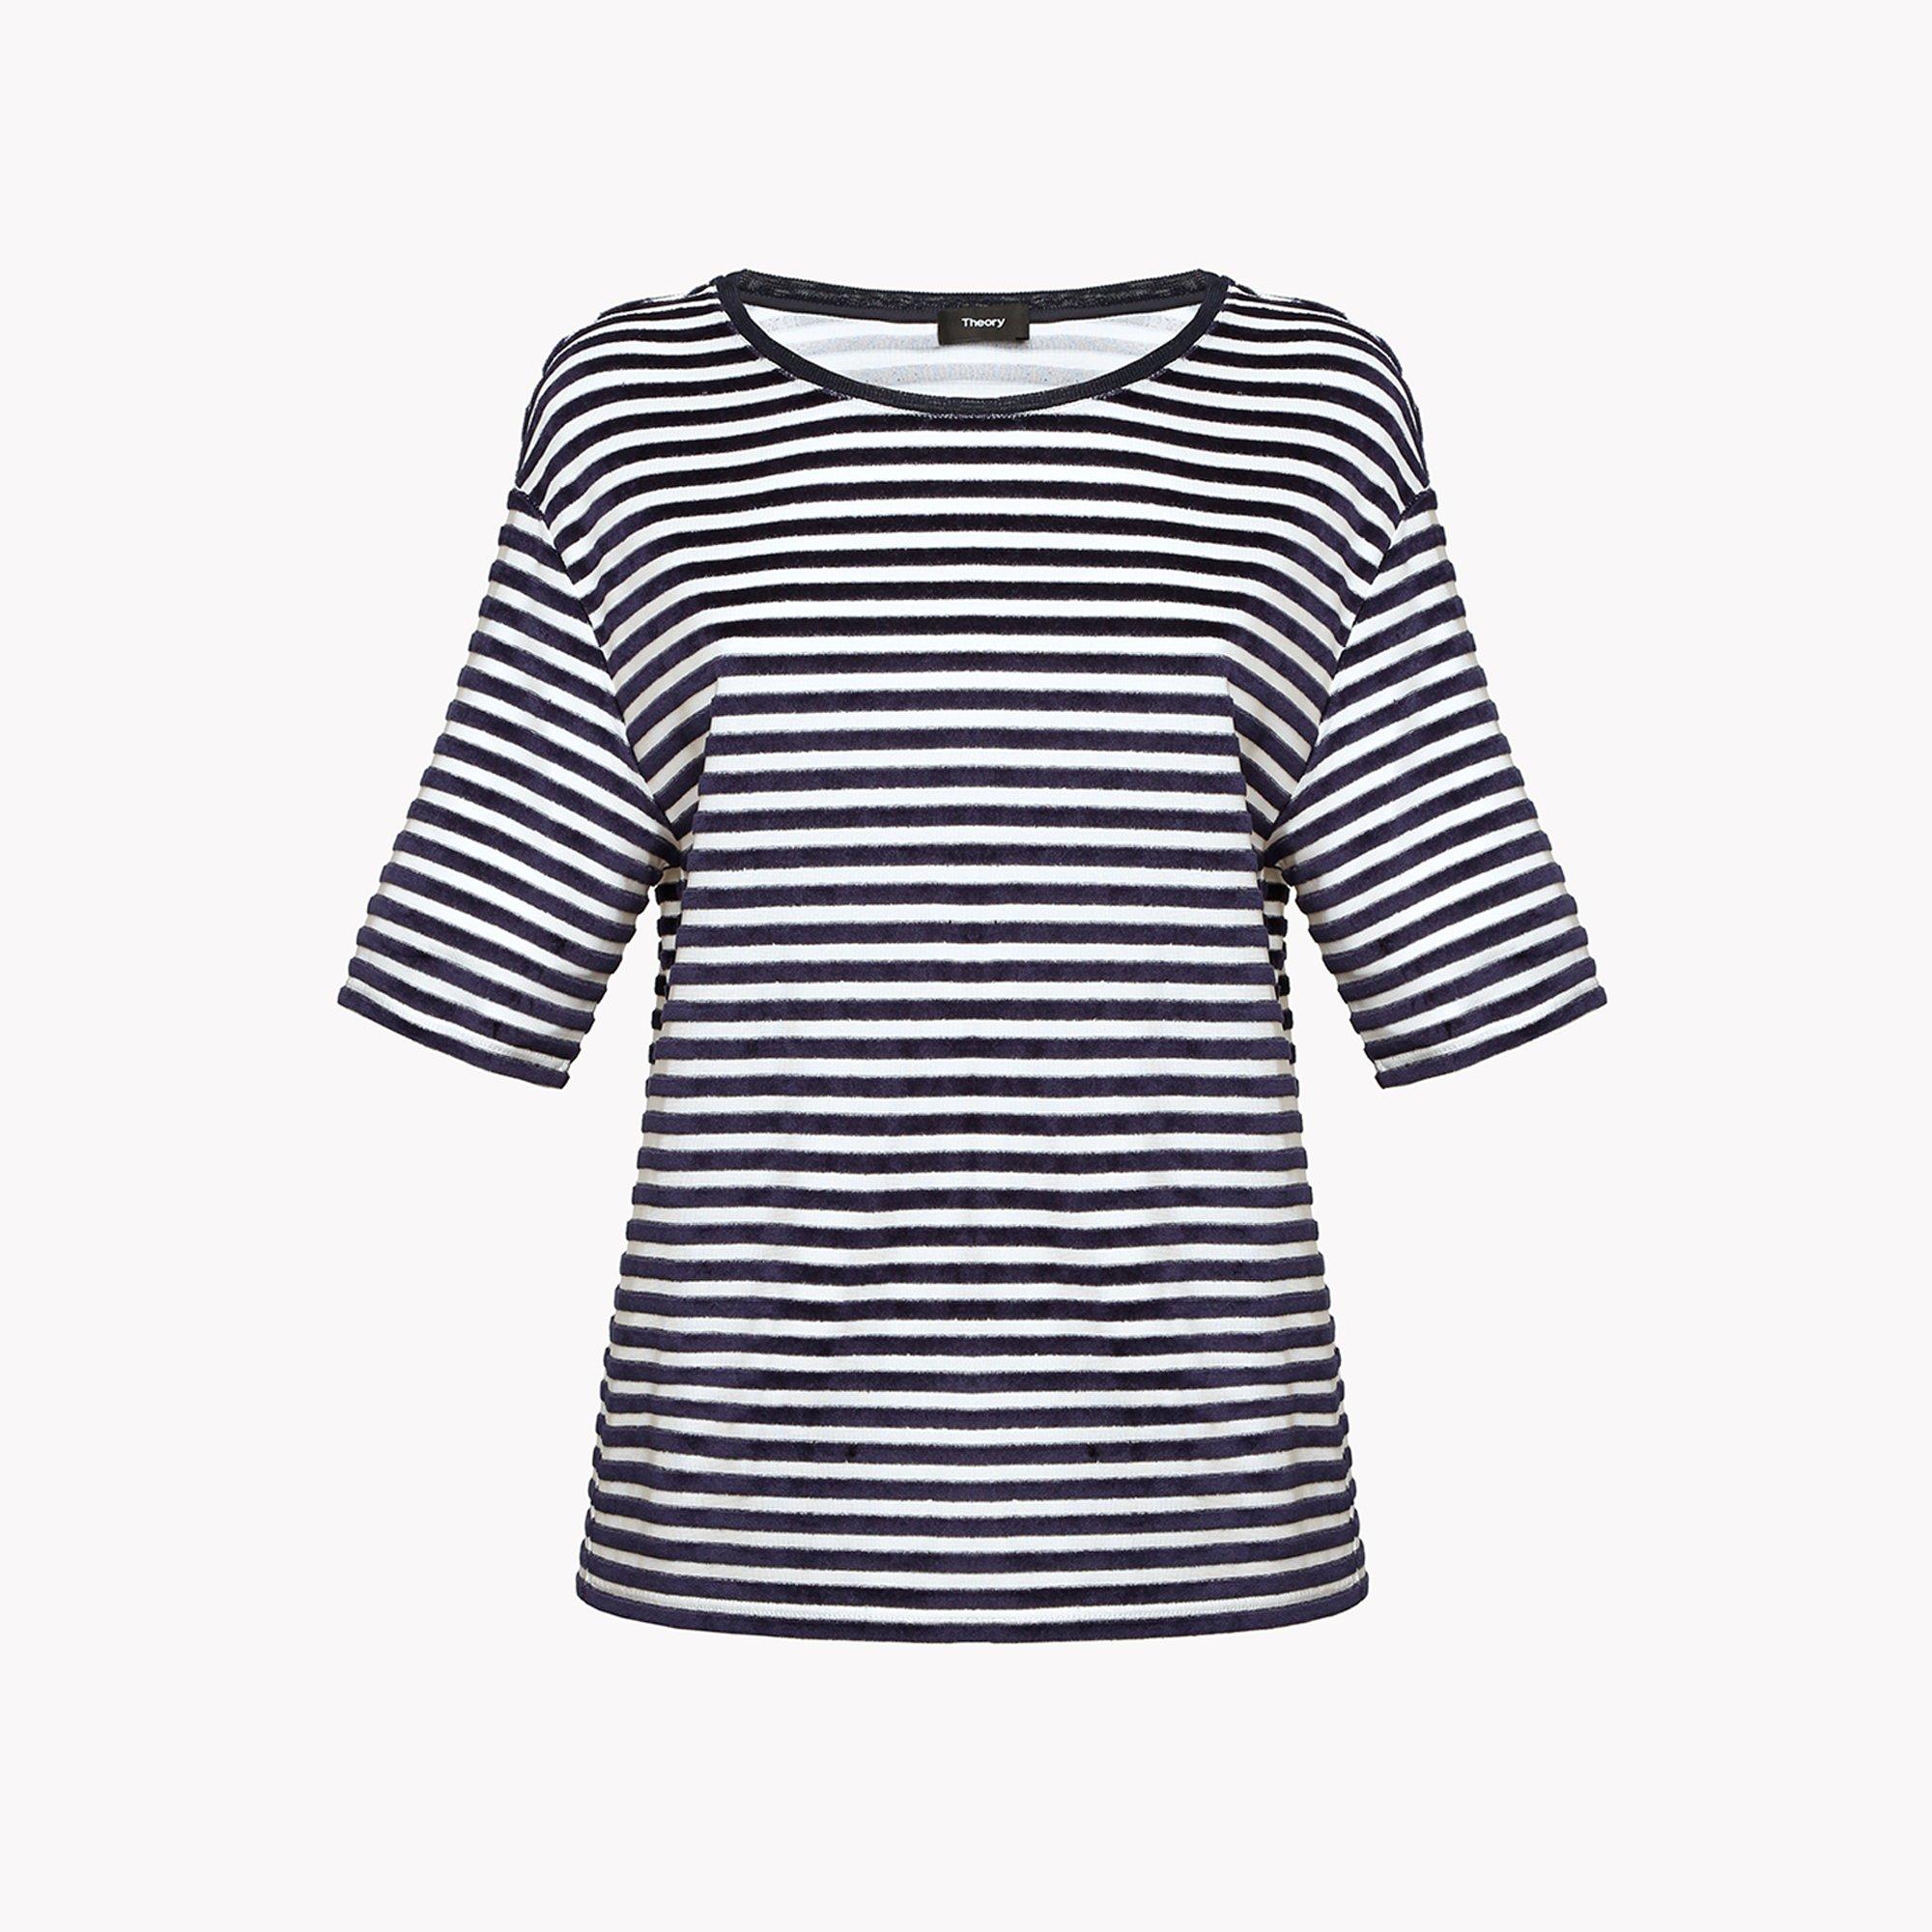 Theory Official Site | Women's Tops